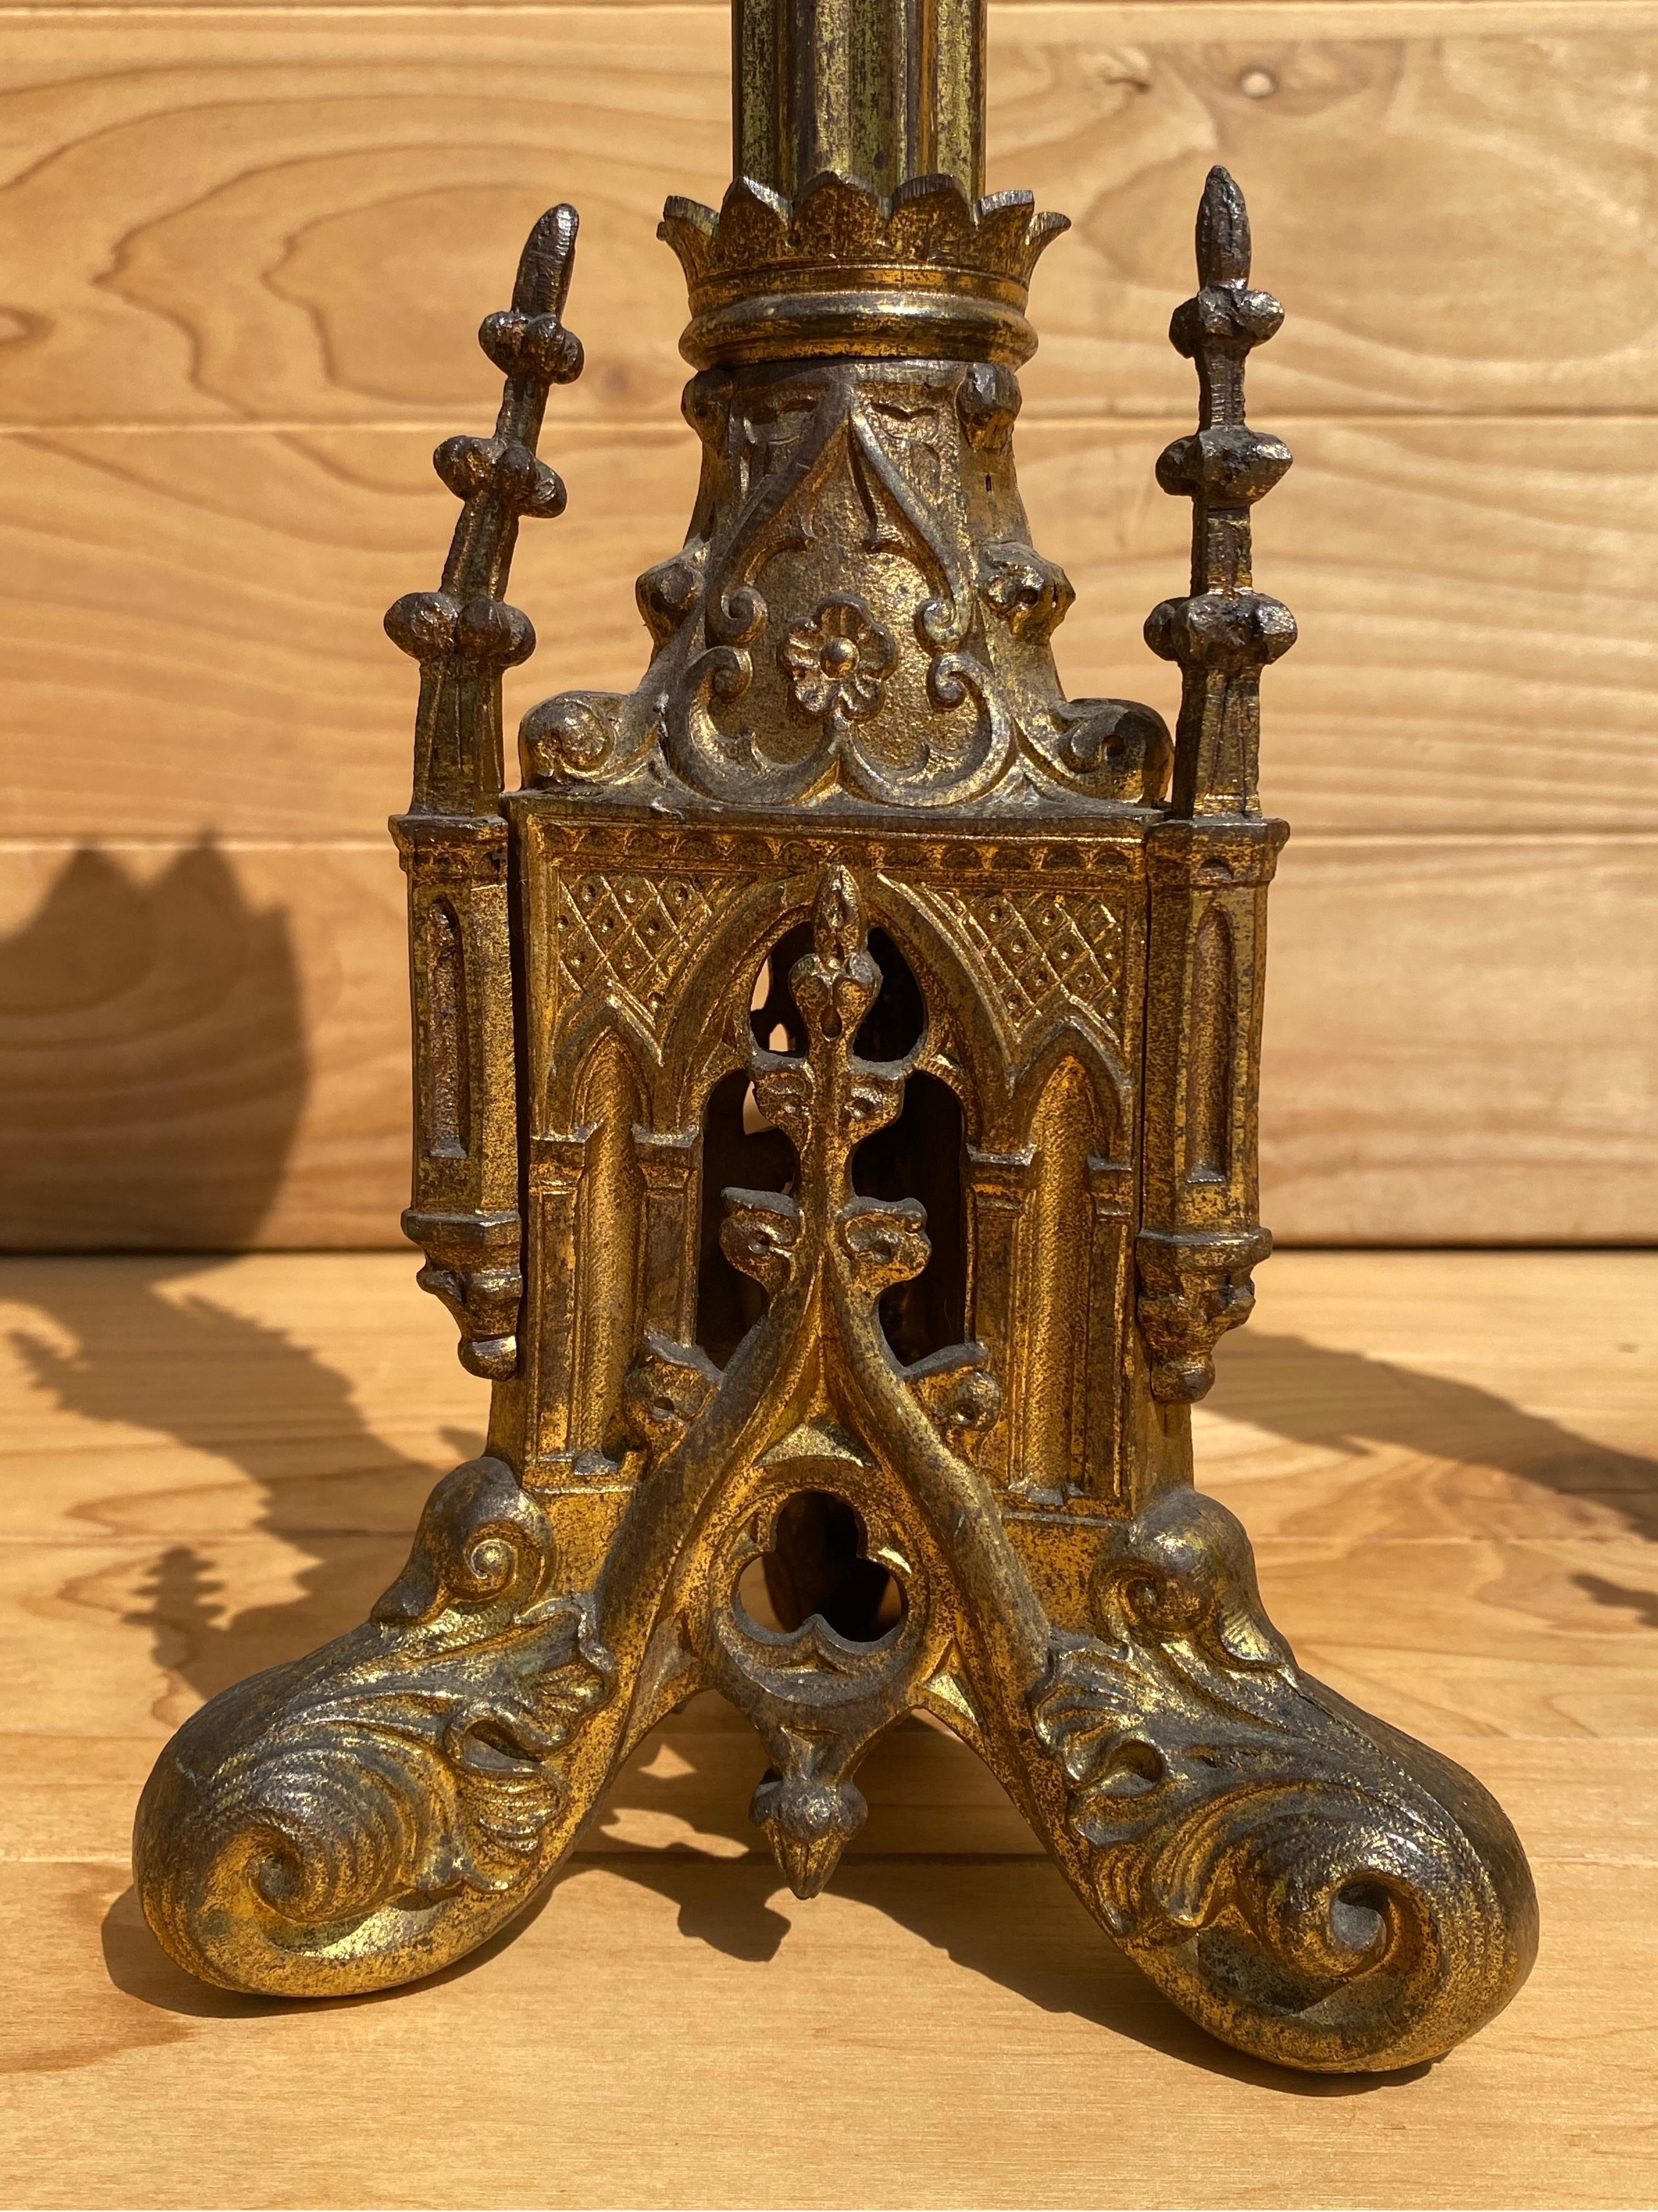 Antique French Neogothic Altar Torchère Candlestick Set w/ Architectural Elements & Patina

Decorate your mantlepiece, altar, church, or chapel with these large ornate candlesticks. The candlesticks have convenient plates to catch the hot wax of the